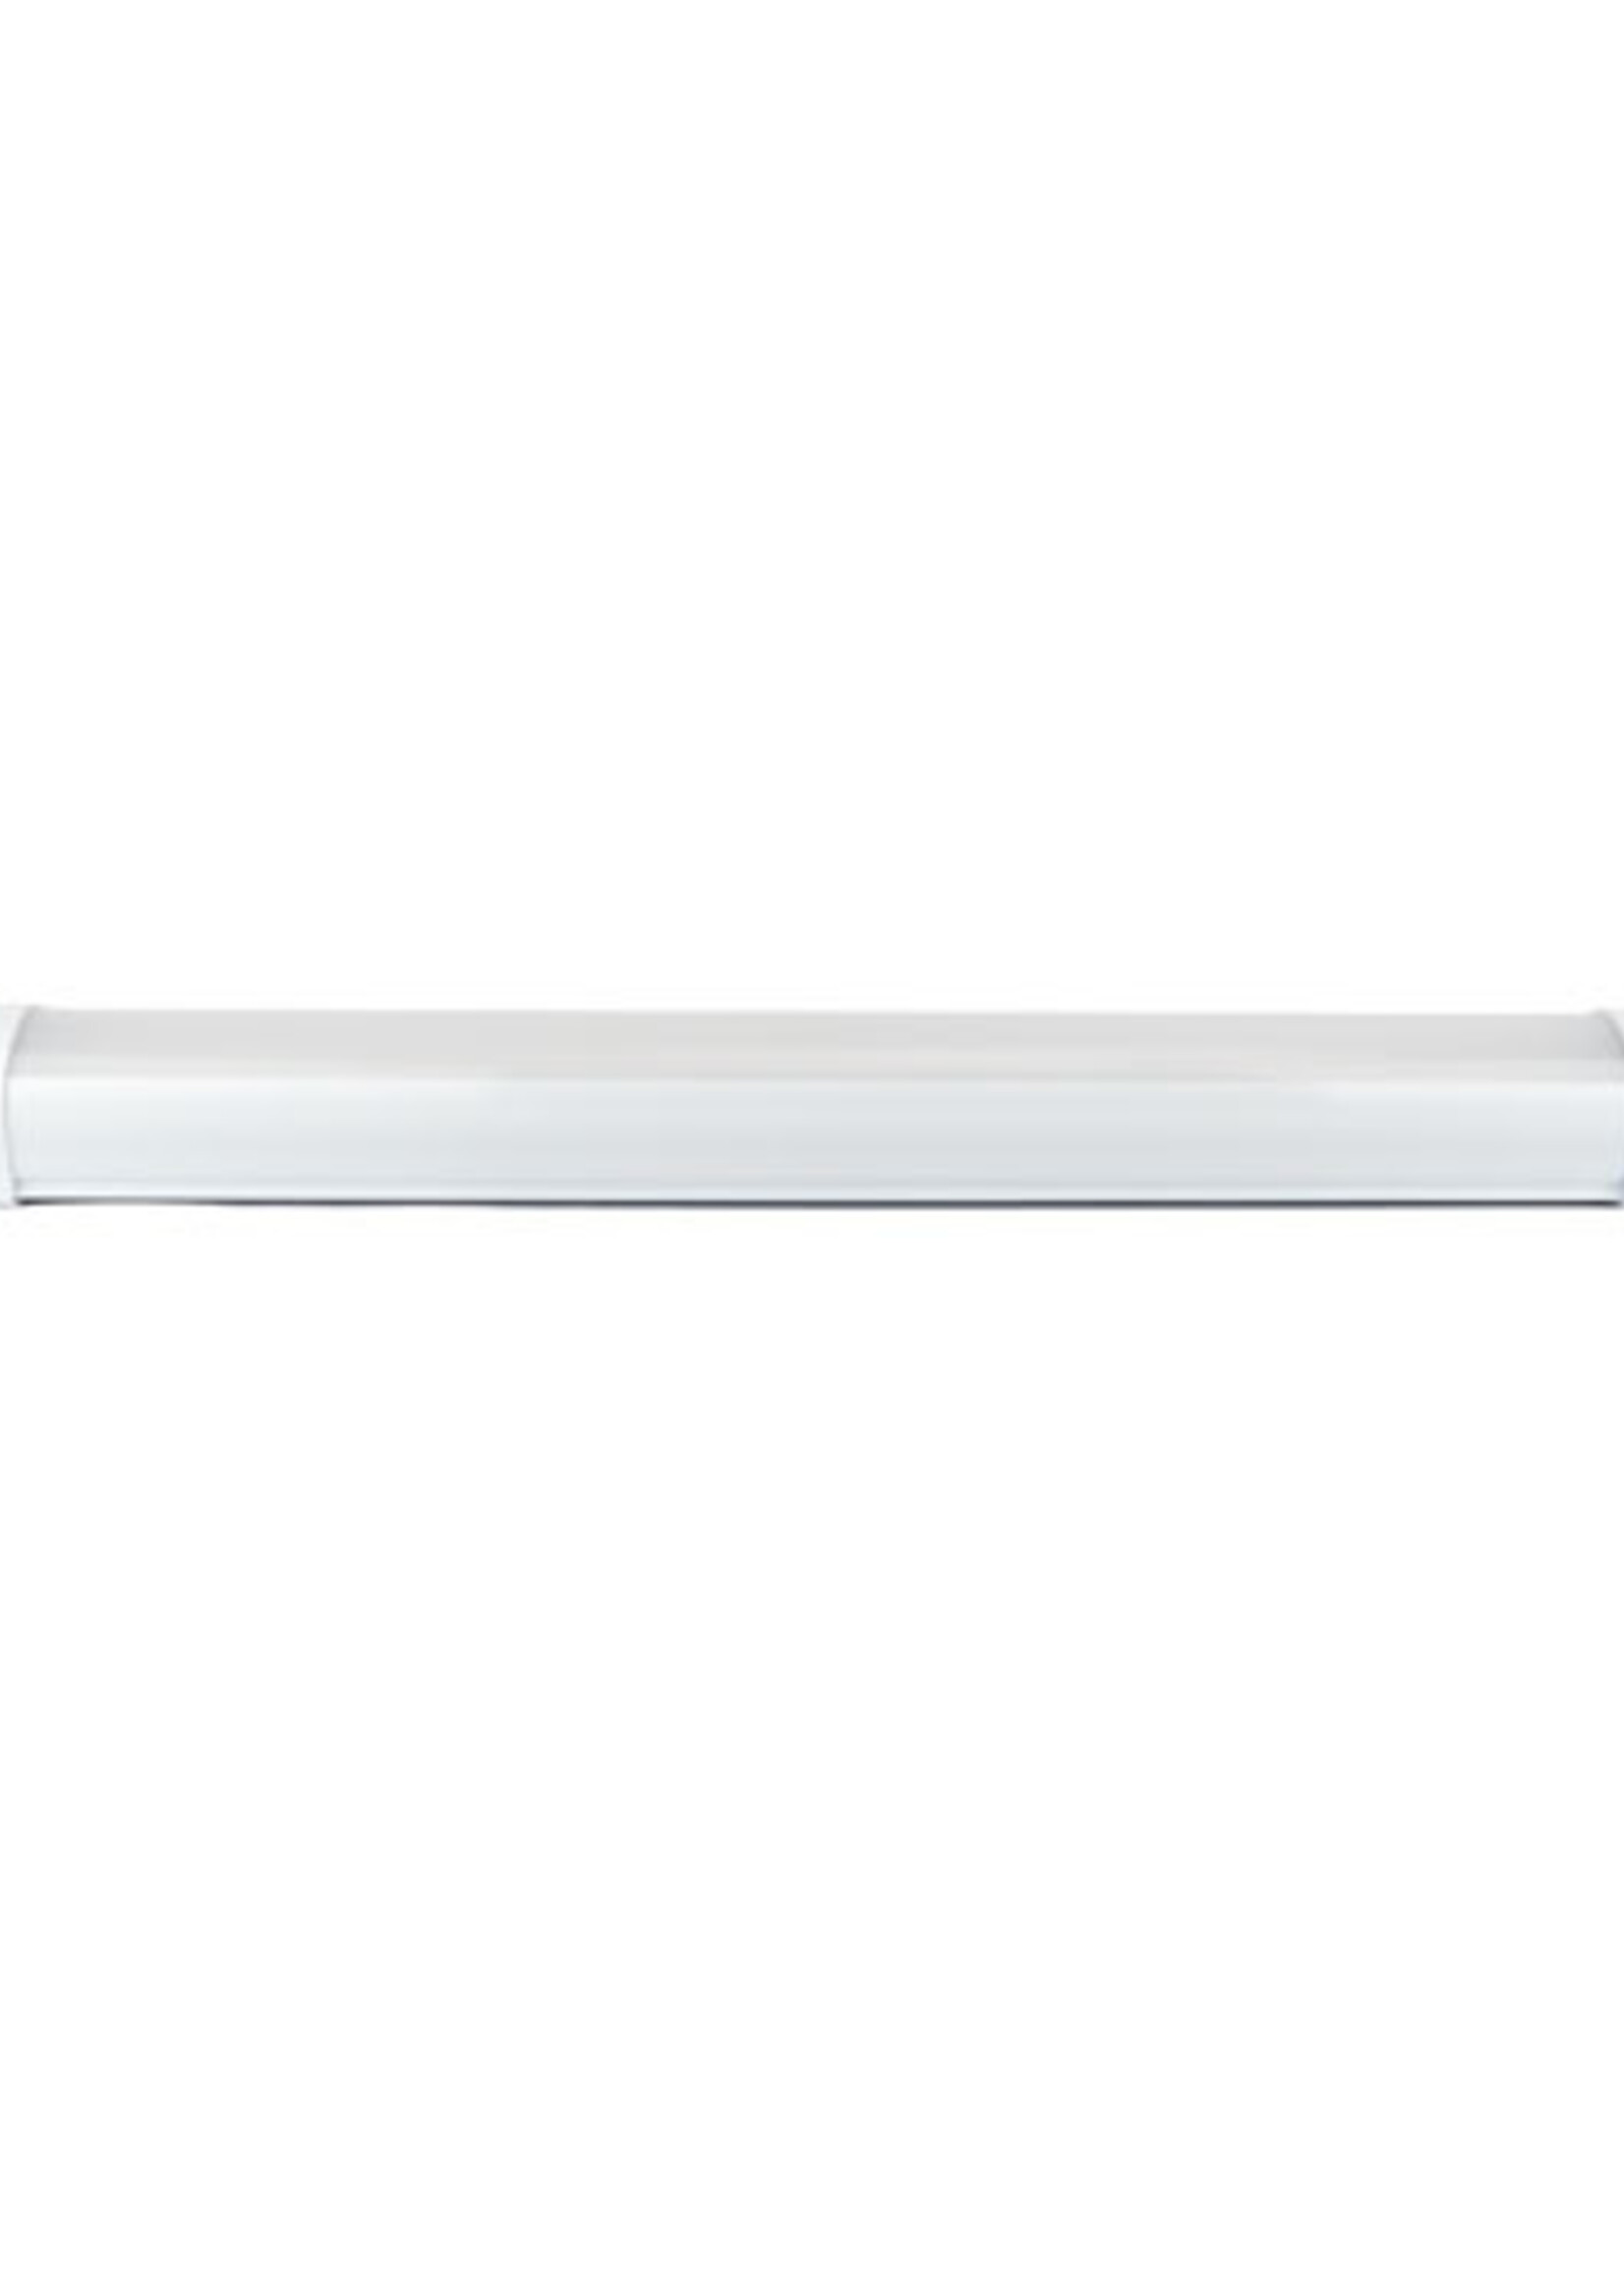 Philips CertaDrive Connectable LED Tri-proof IP65 water resistant 122cm 36W Philips driver